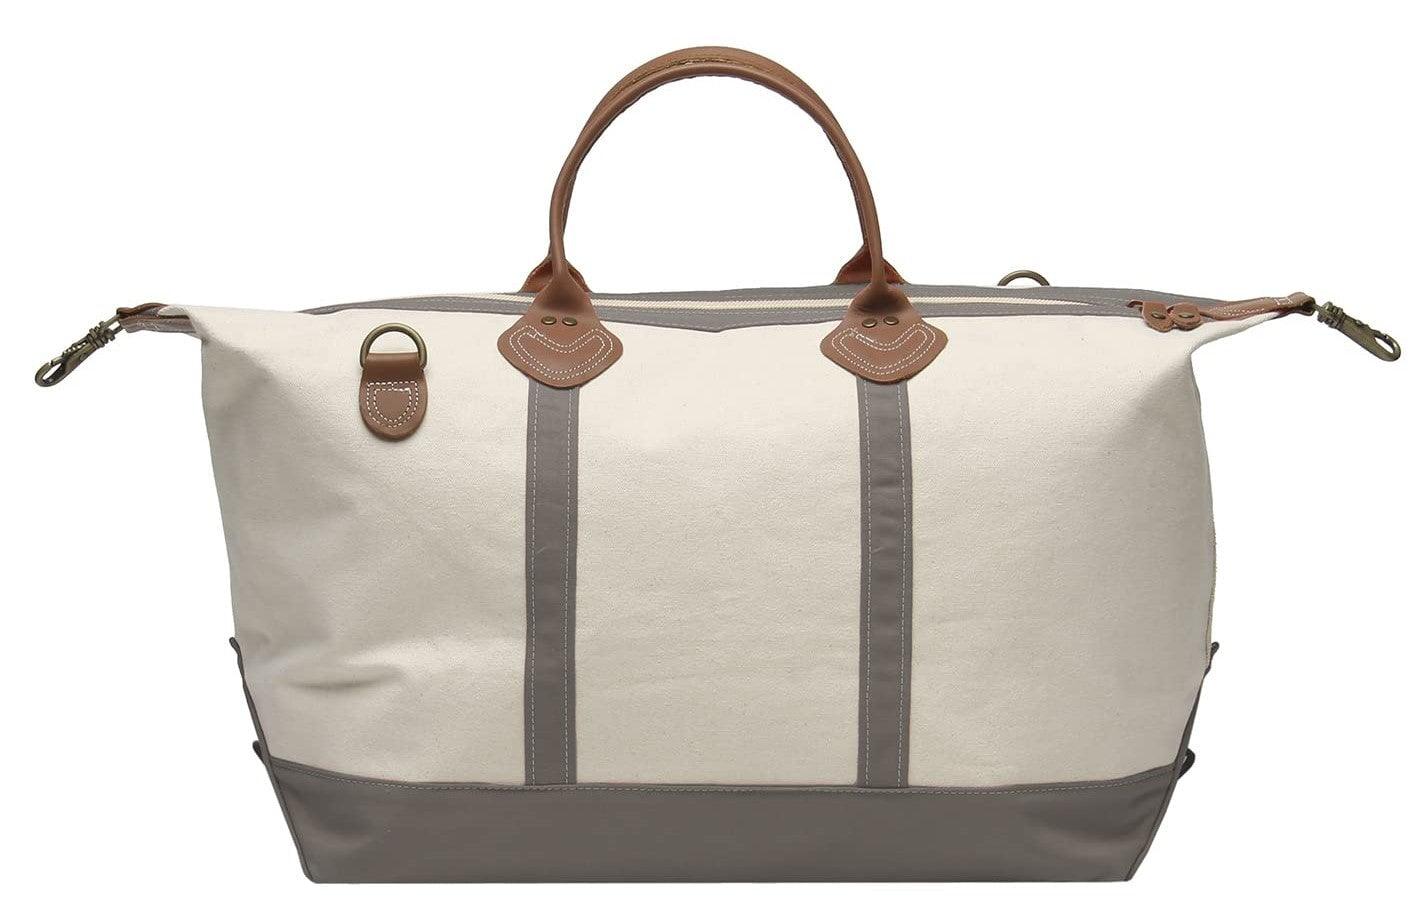 Tag&Crew's Signature Cotton Canvas Weekender Duffle: USA's Best Travel Bag with Metal Accessories & Adjustable Strap (15